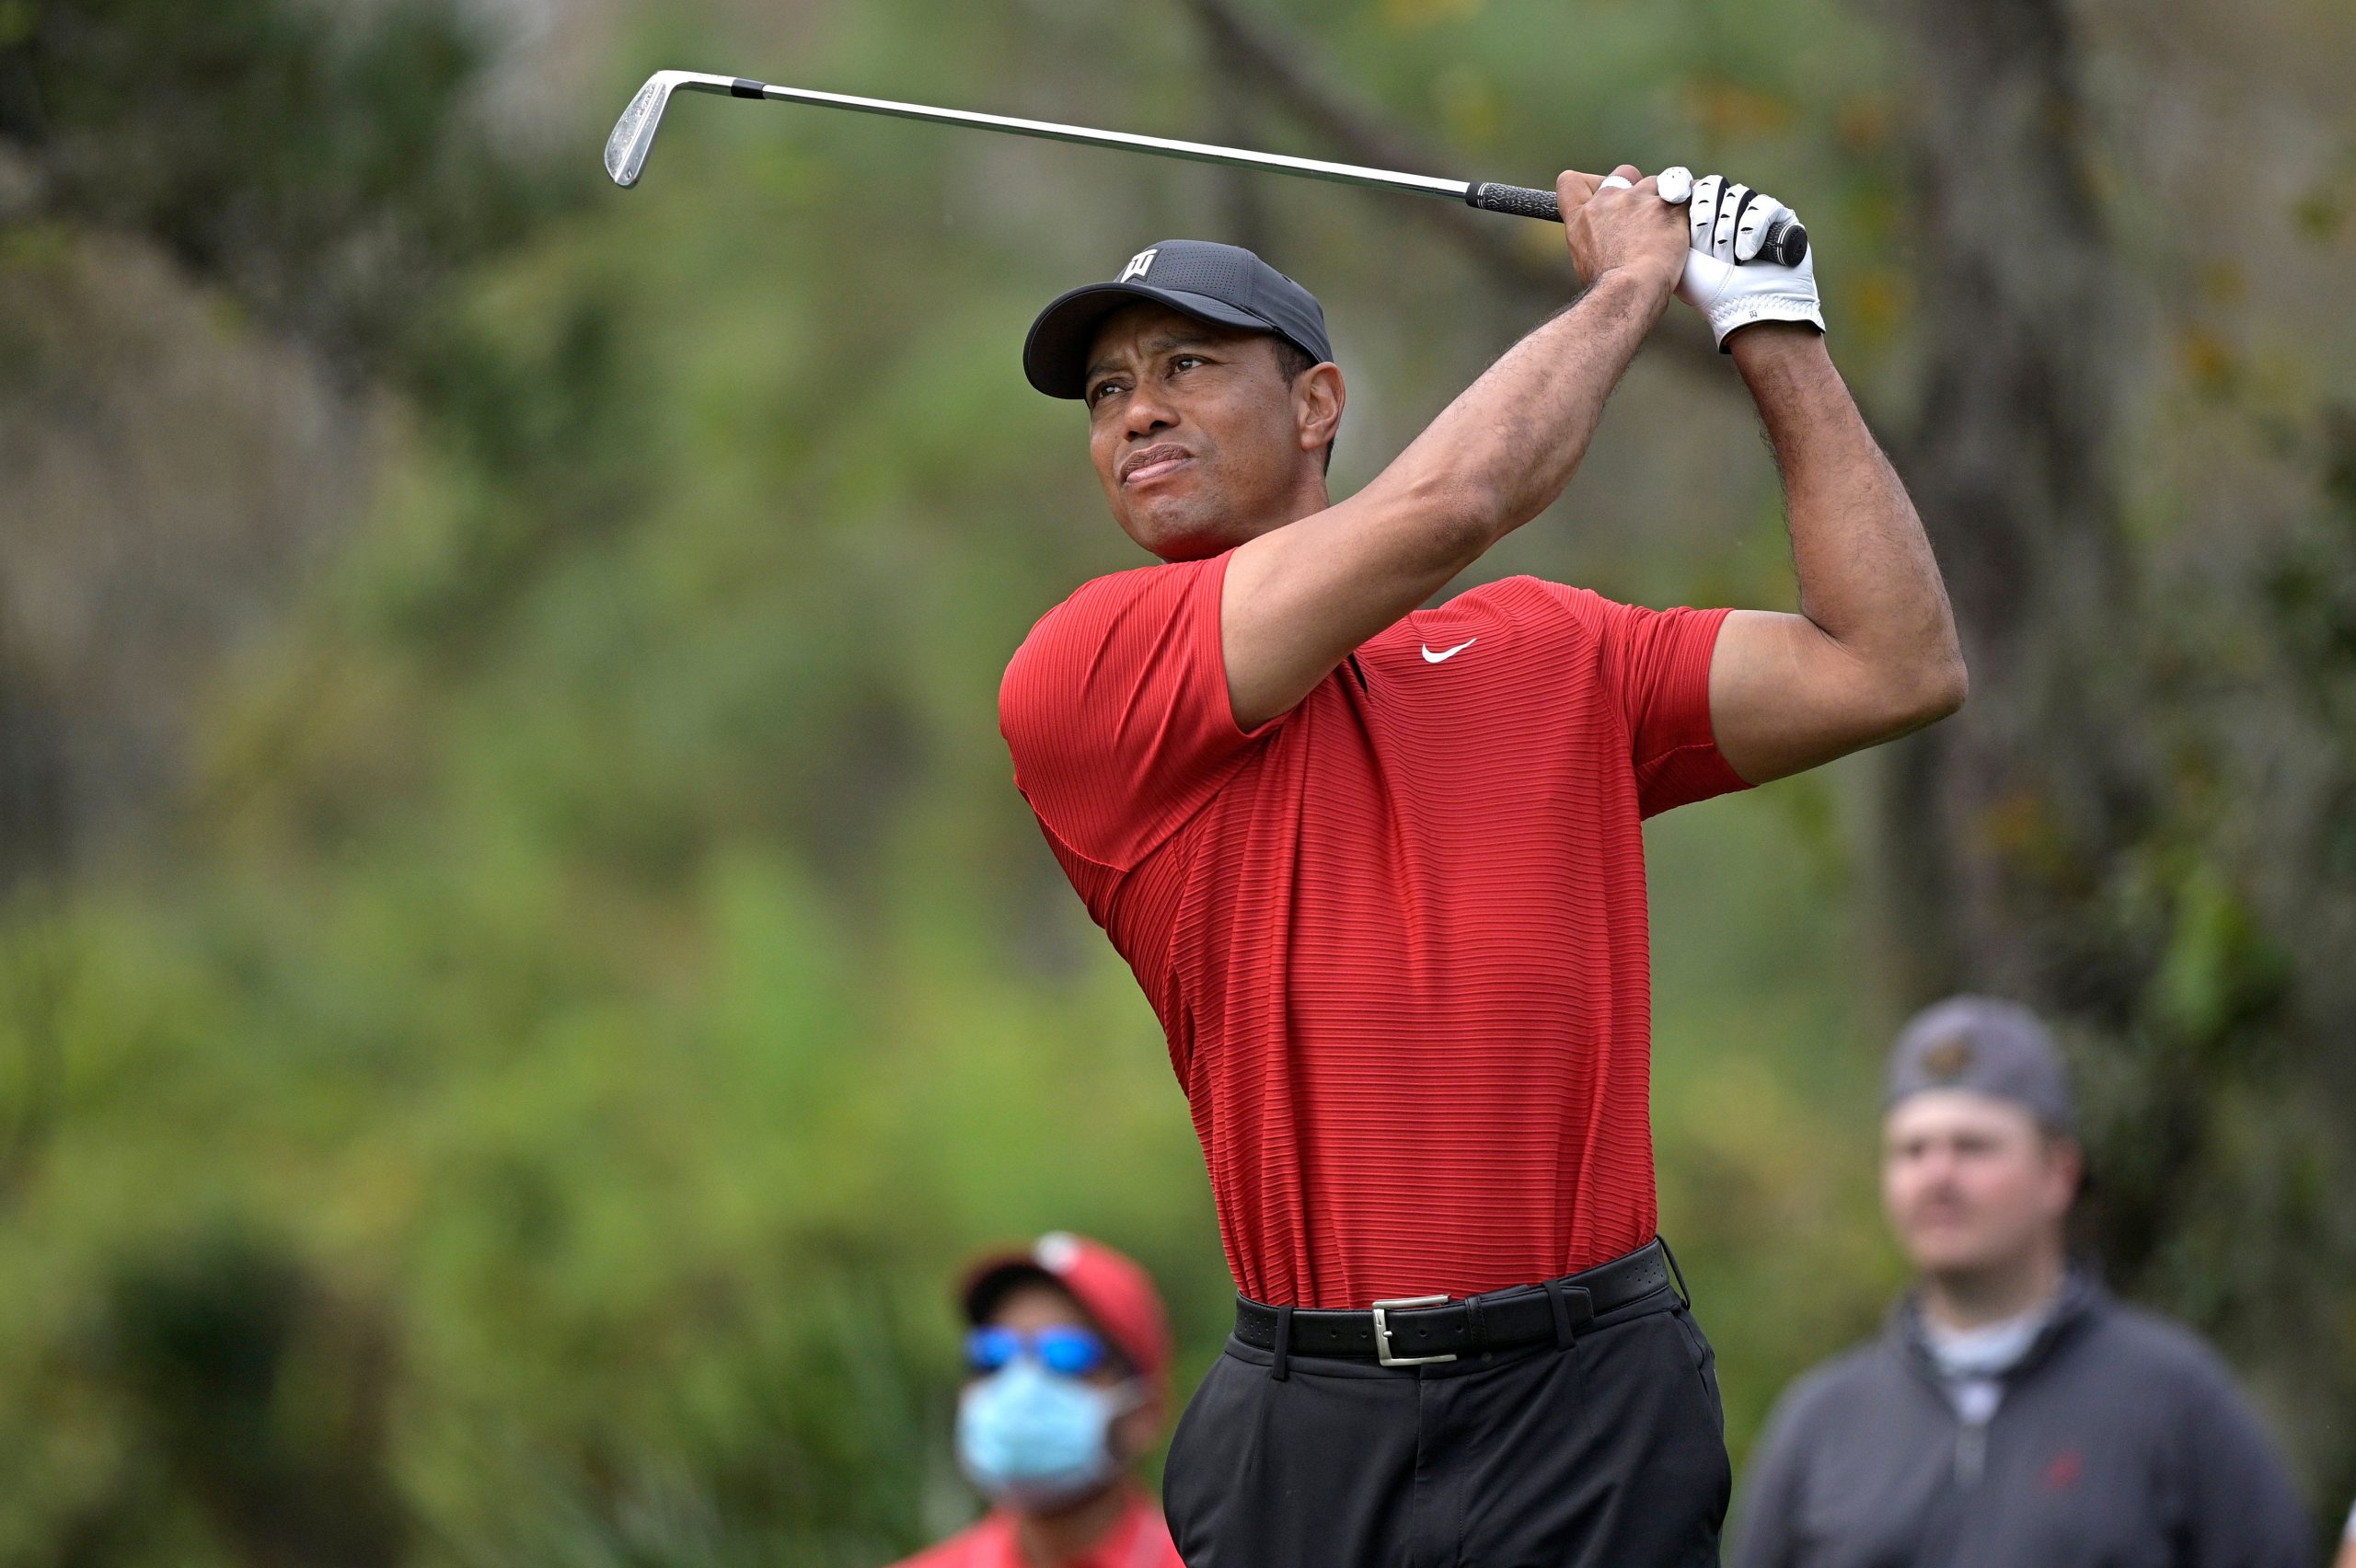 Tiger Woods was driving at nearly twice the speed limit, causing Feb crash